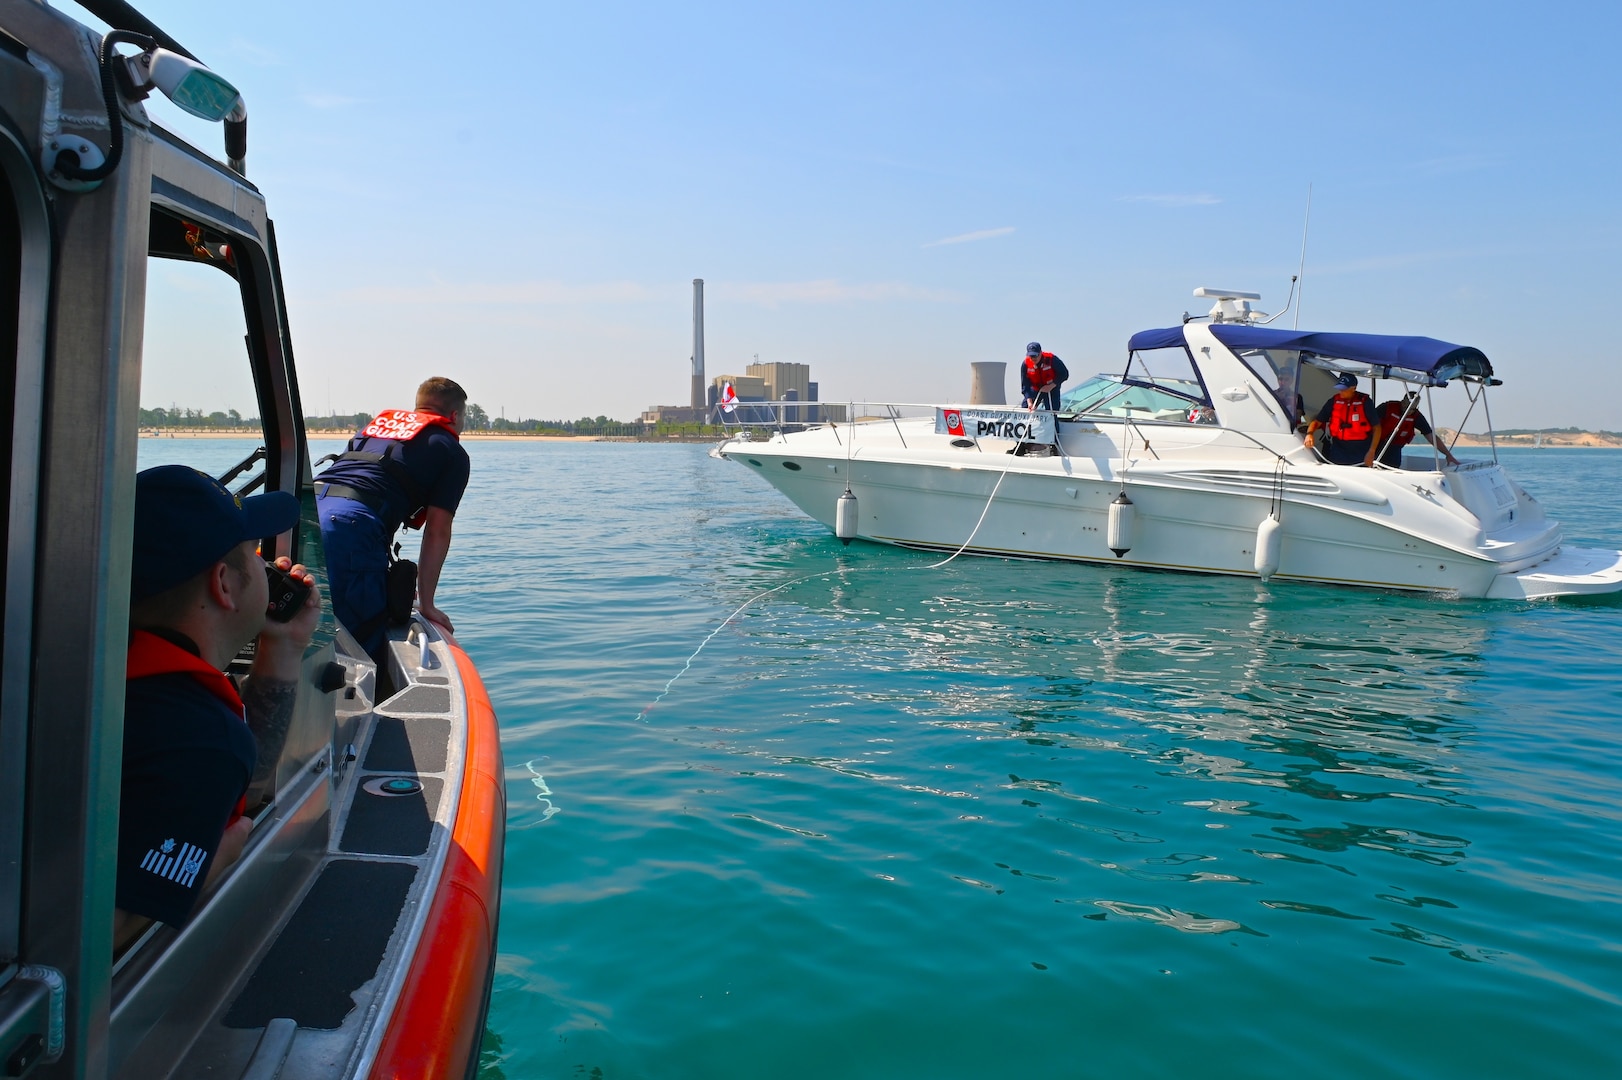 25 auxiliarists from Wisconsin, Illinois, Indiana, and Michigan, and active-duty members from Station Michigan City recently conducted three search and rescue drills and studied operations policy over two days.